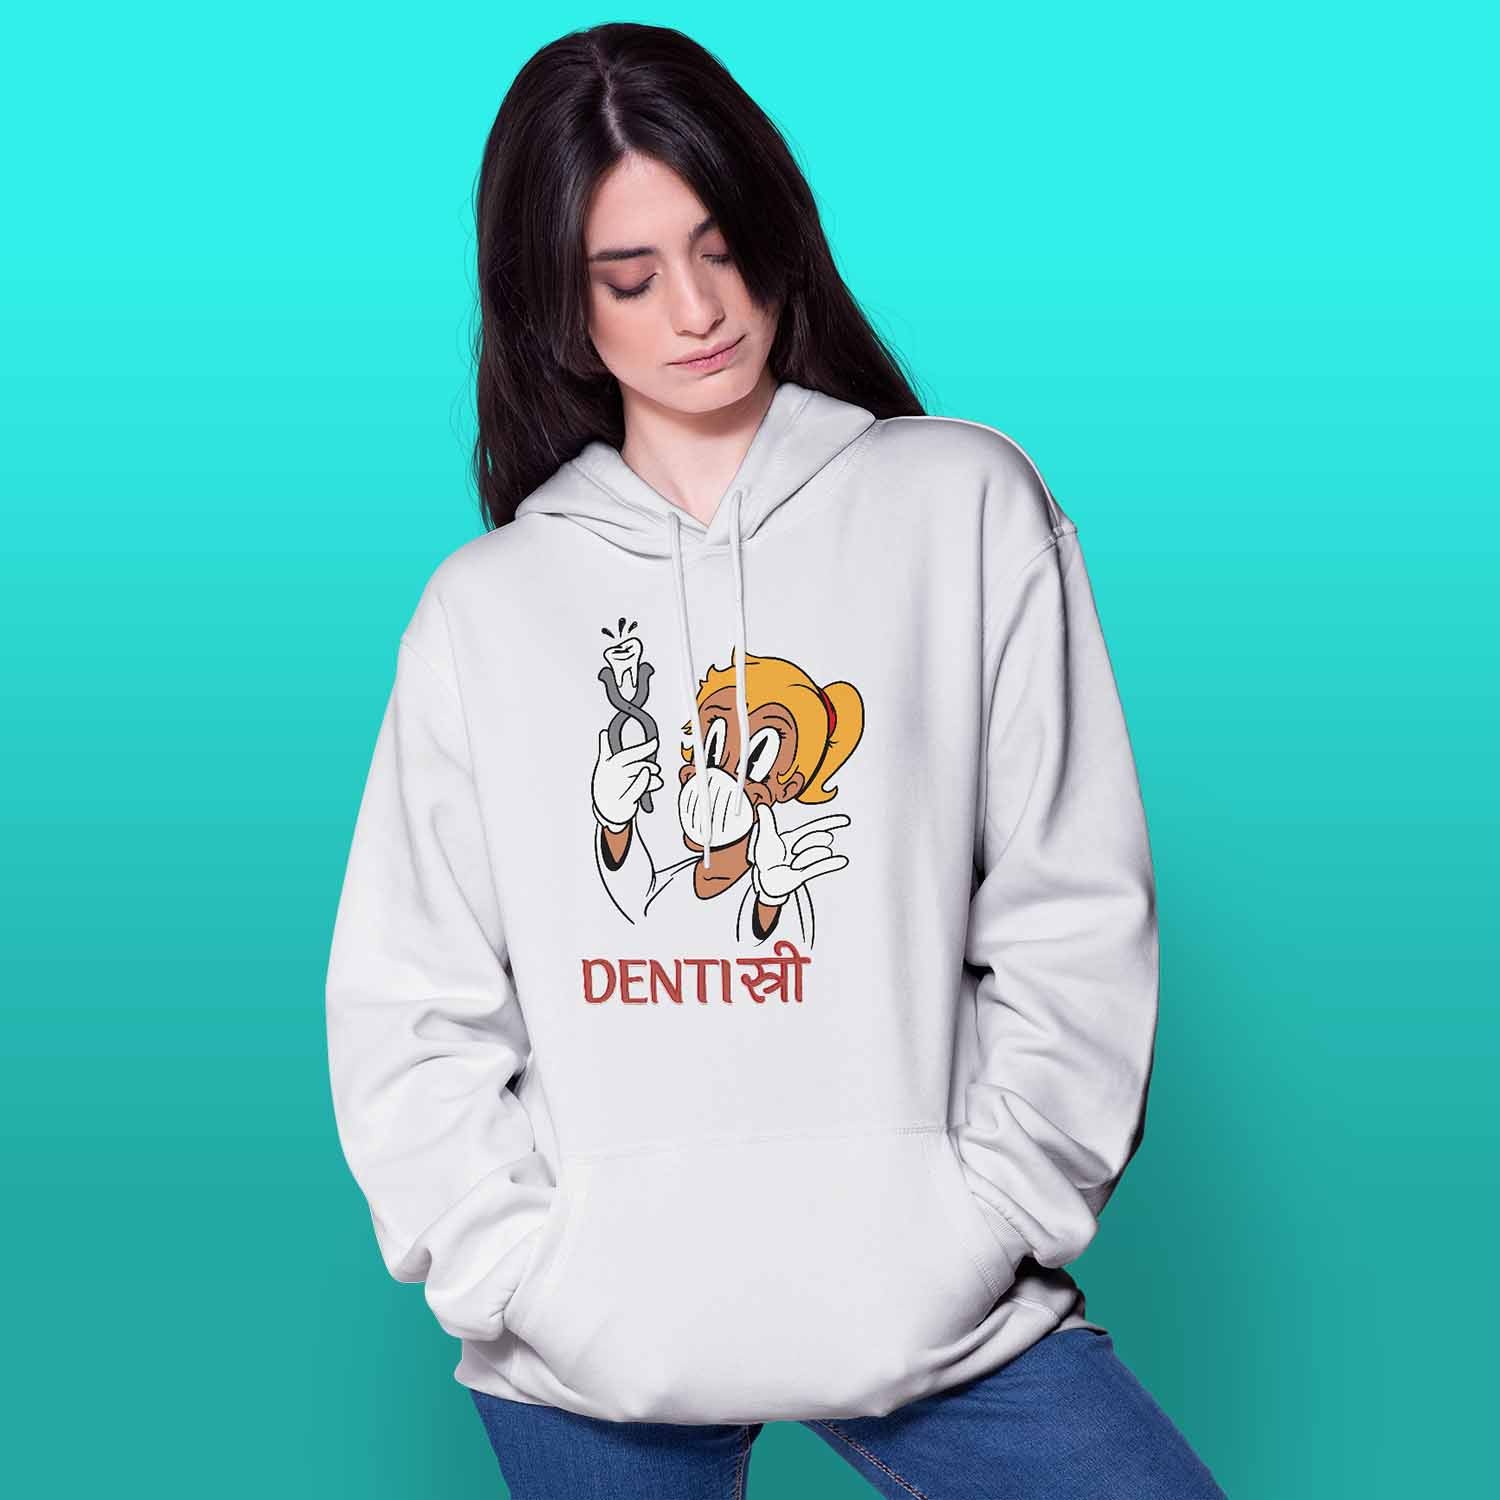 Hoodie for female dentists